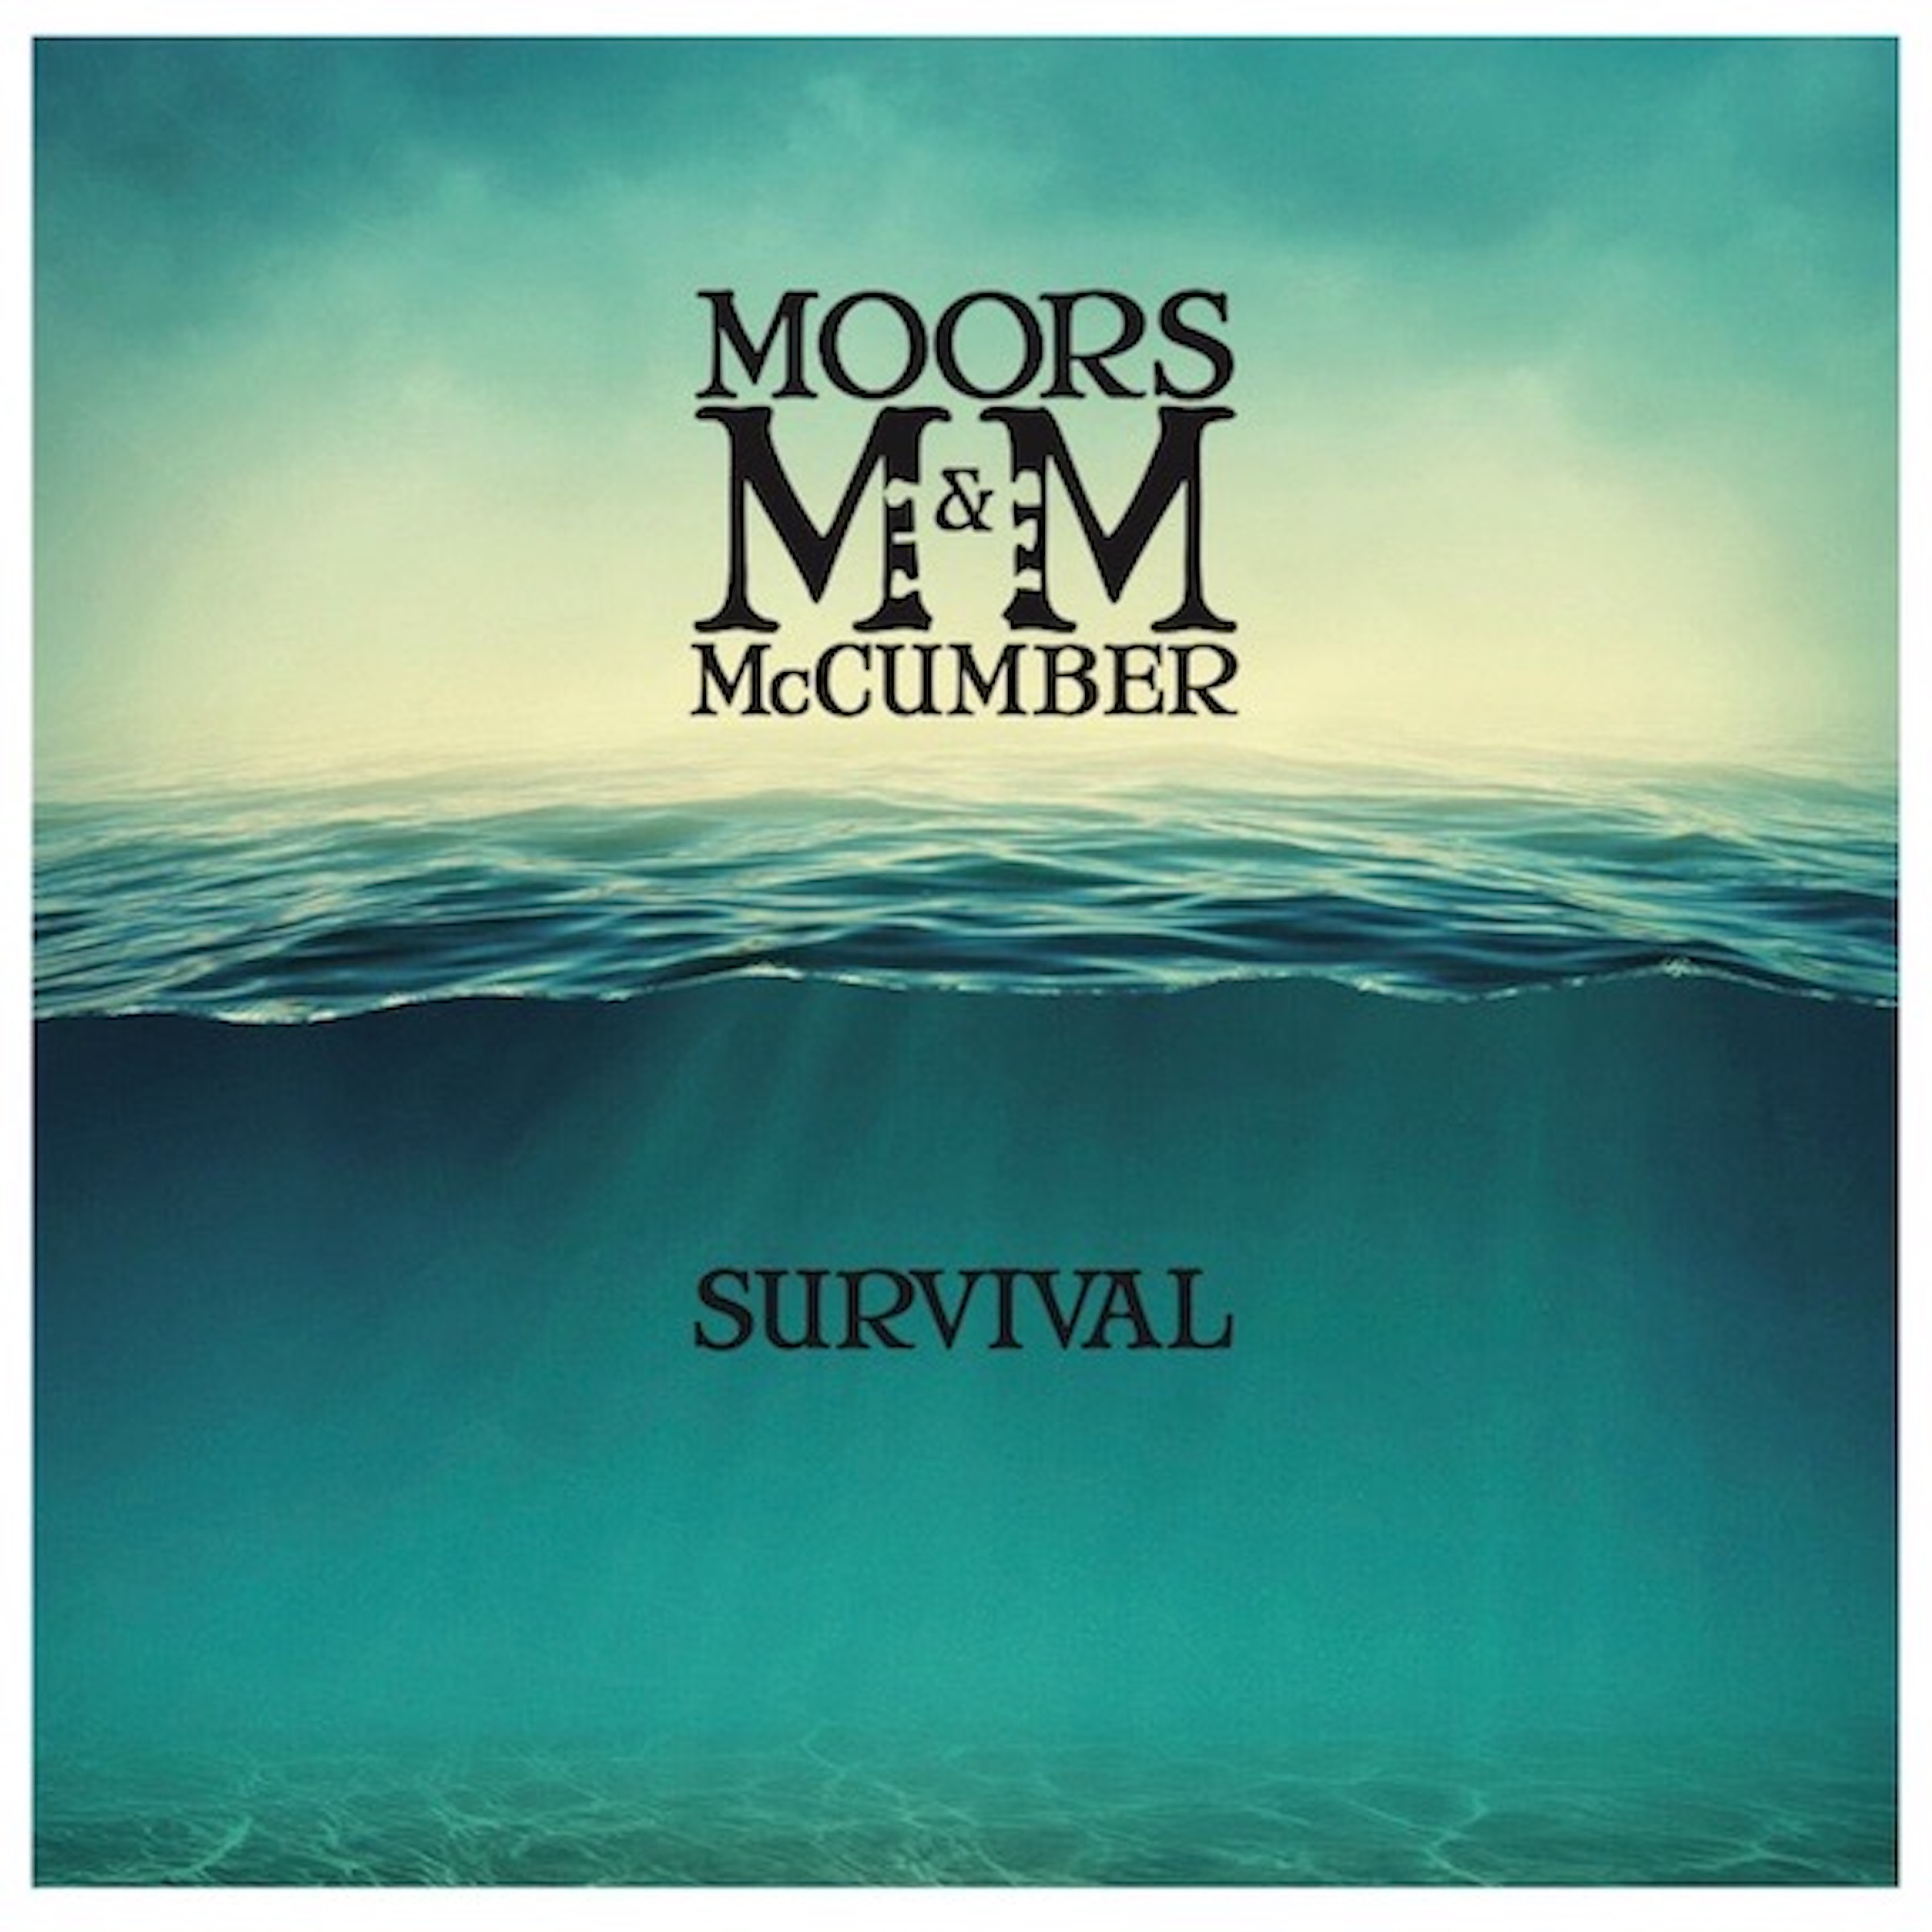 Moors & McCumber's New Album 'Survival' Out 10/15/21